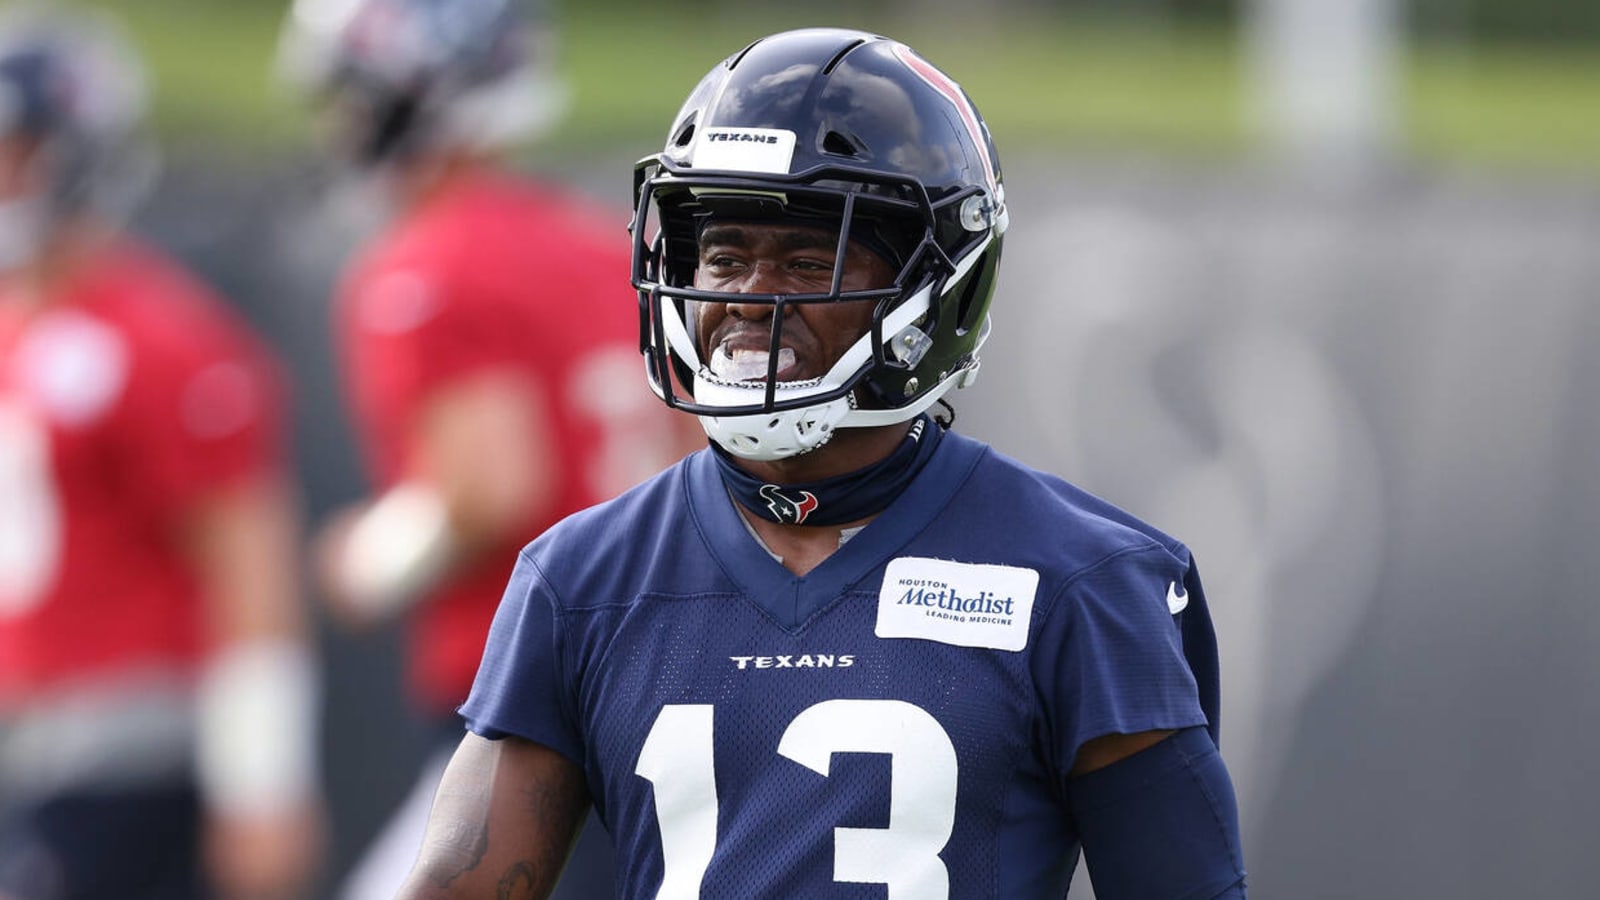 Report: Texans WR Brandin Cooks not expected to play in Week 9